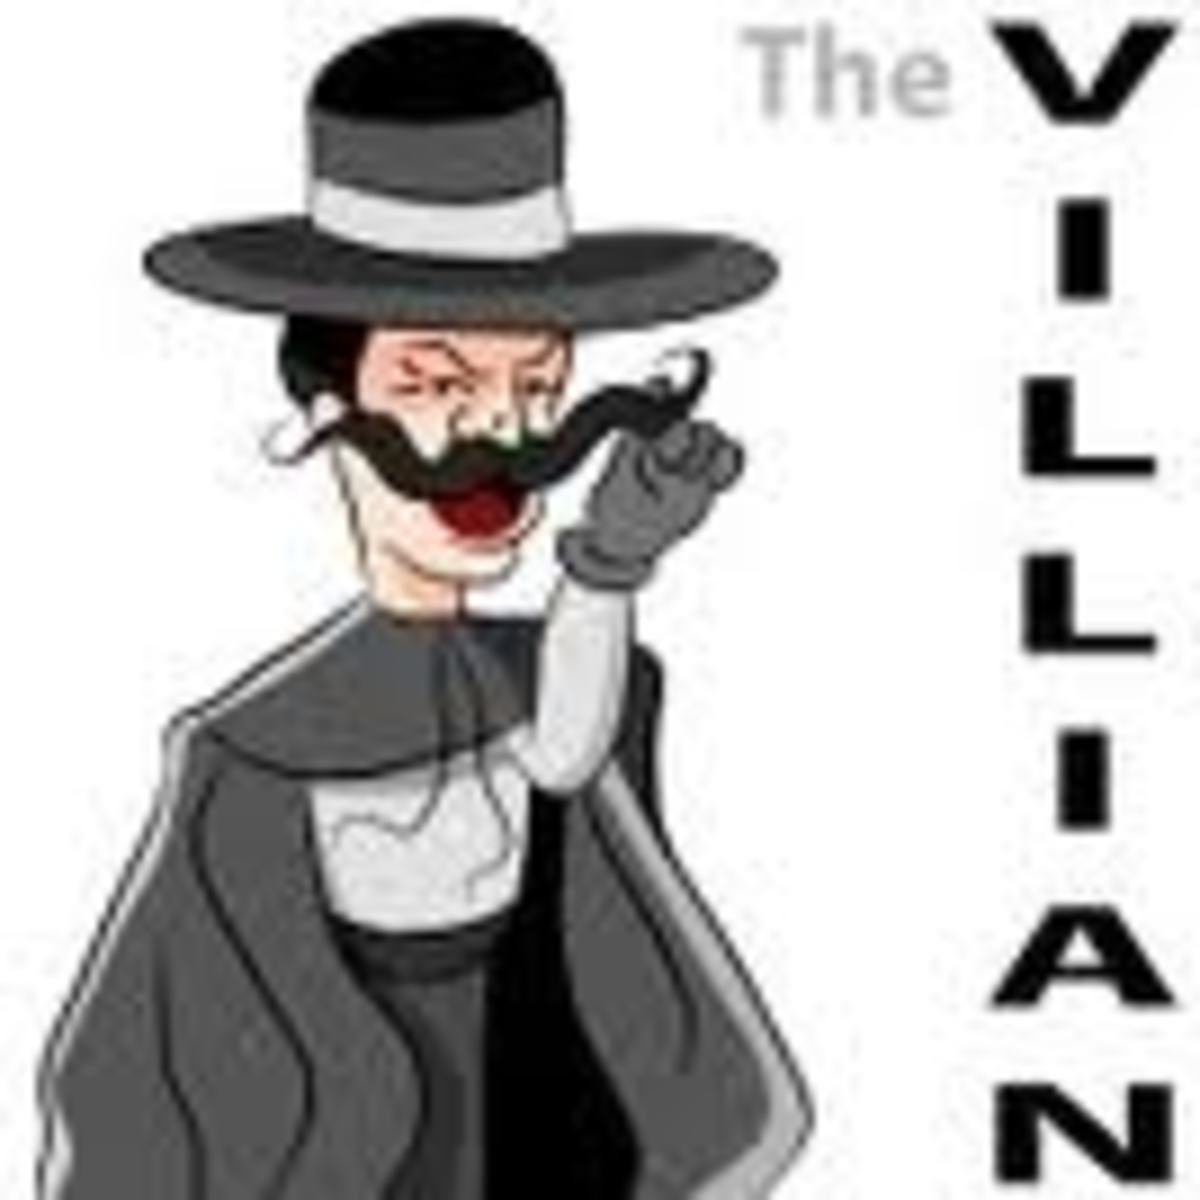 You too can be the villian.